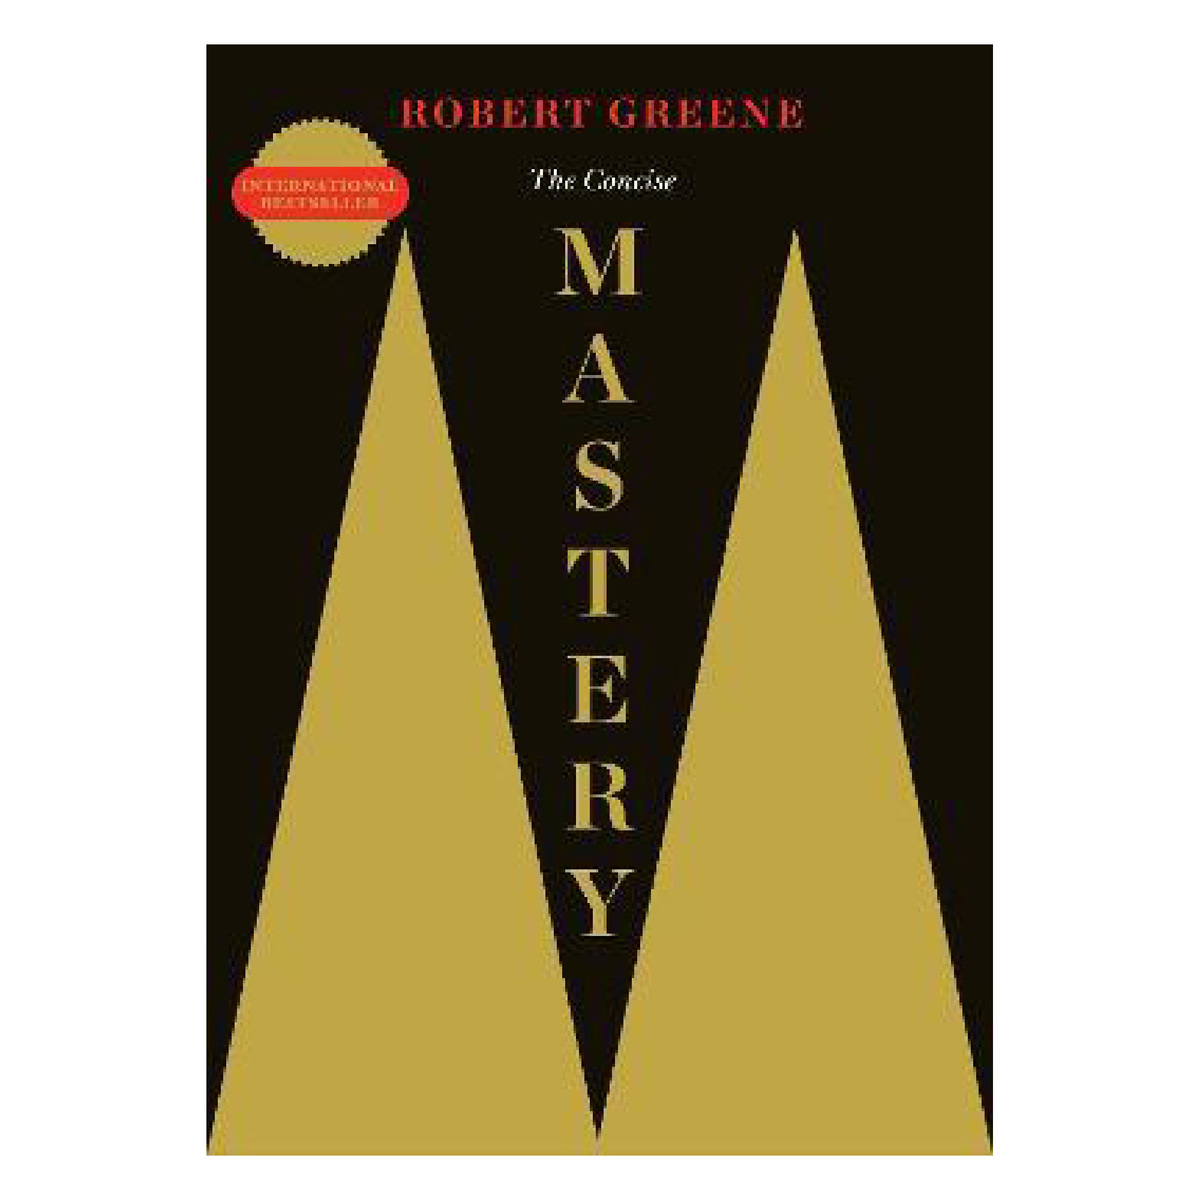 The Concise Mastery, Paperback